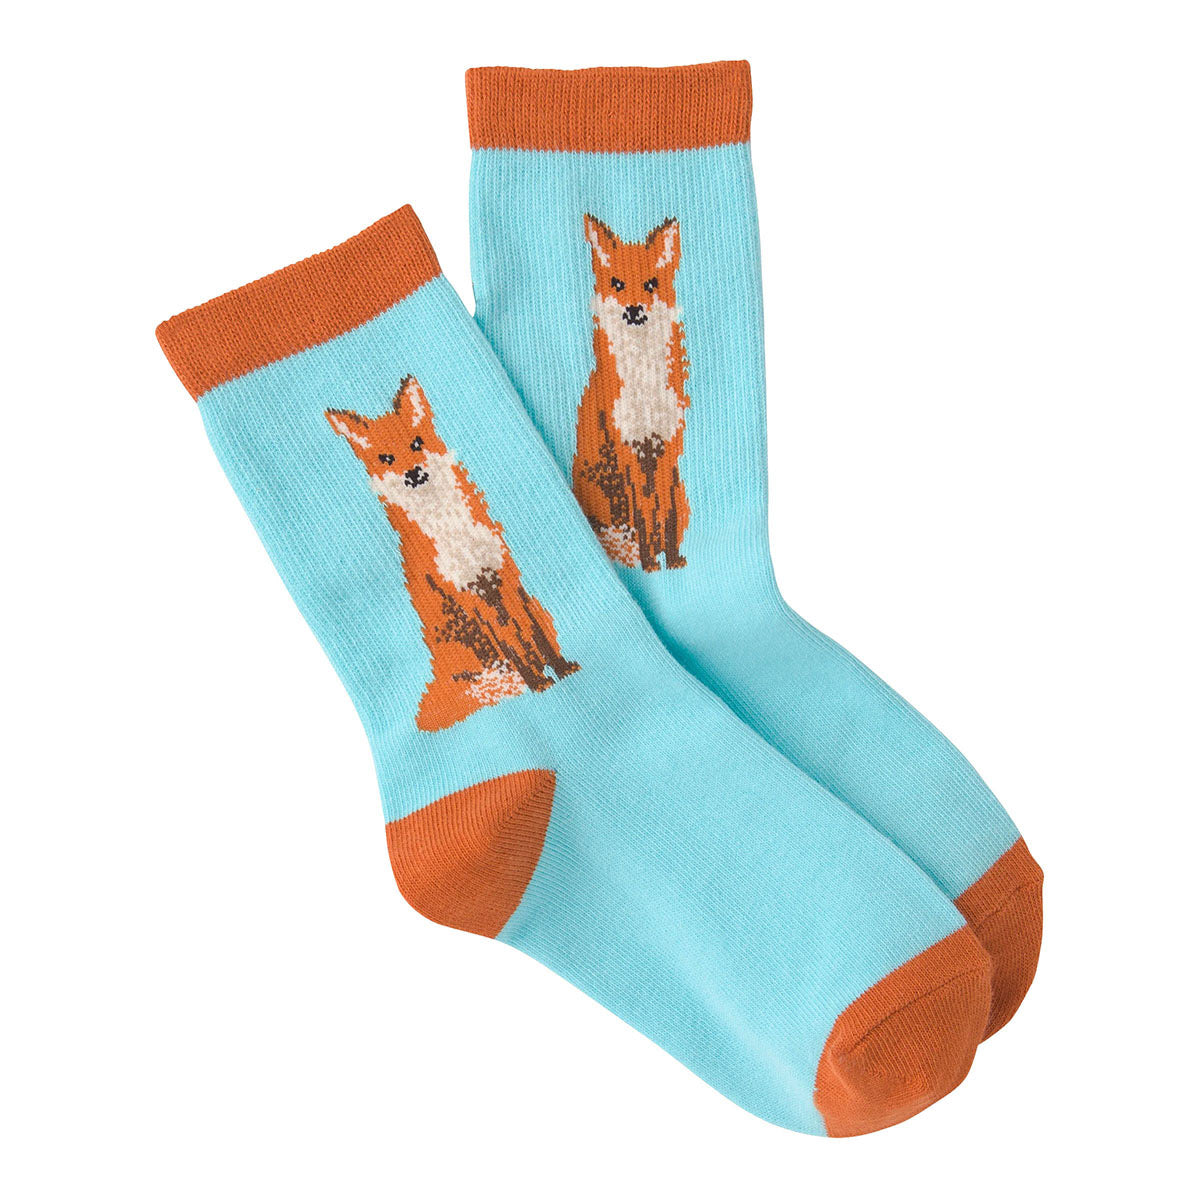 A pair of K. Bell Socks Foxy Crew Turquoise children&#39;s socks with orange cuffs and red fox print patterns.